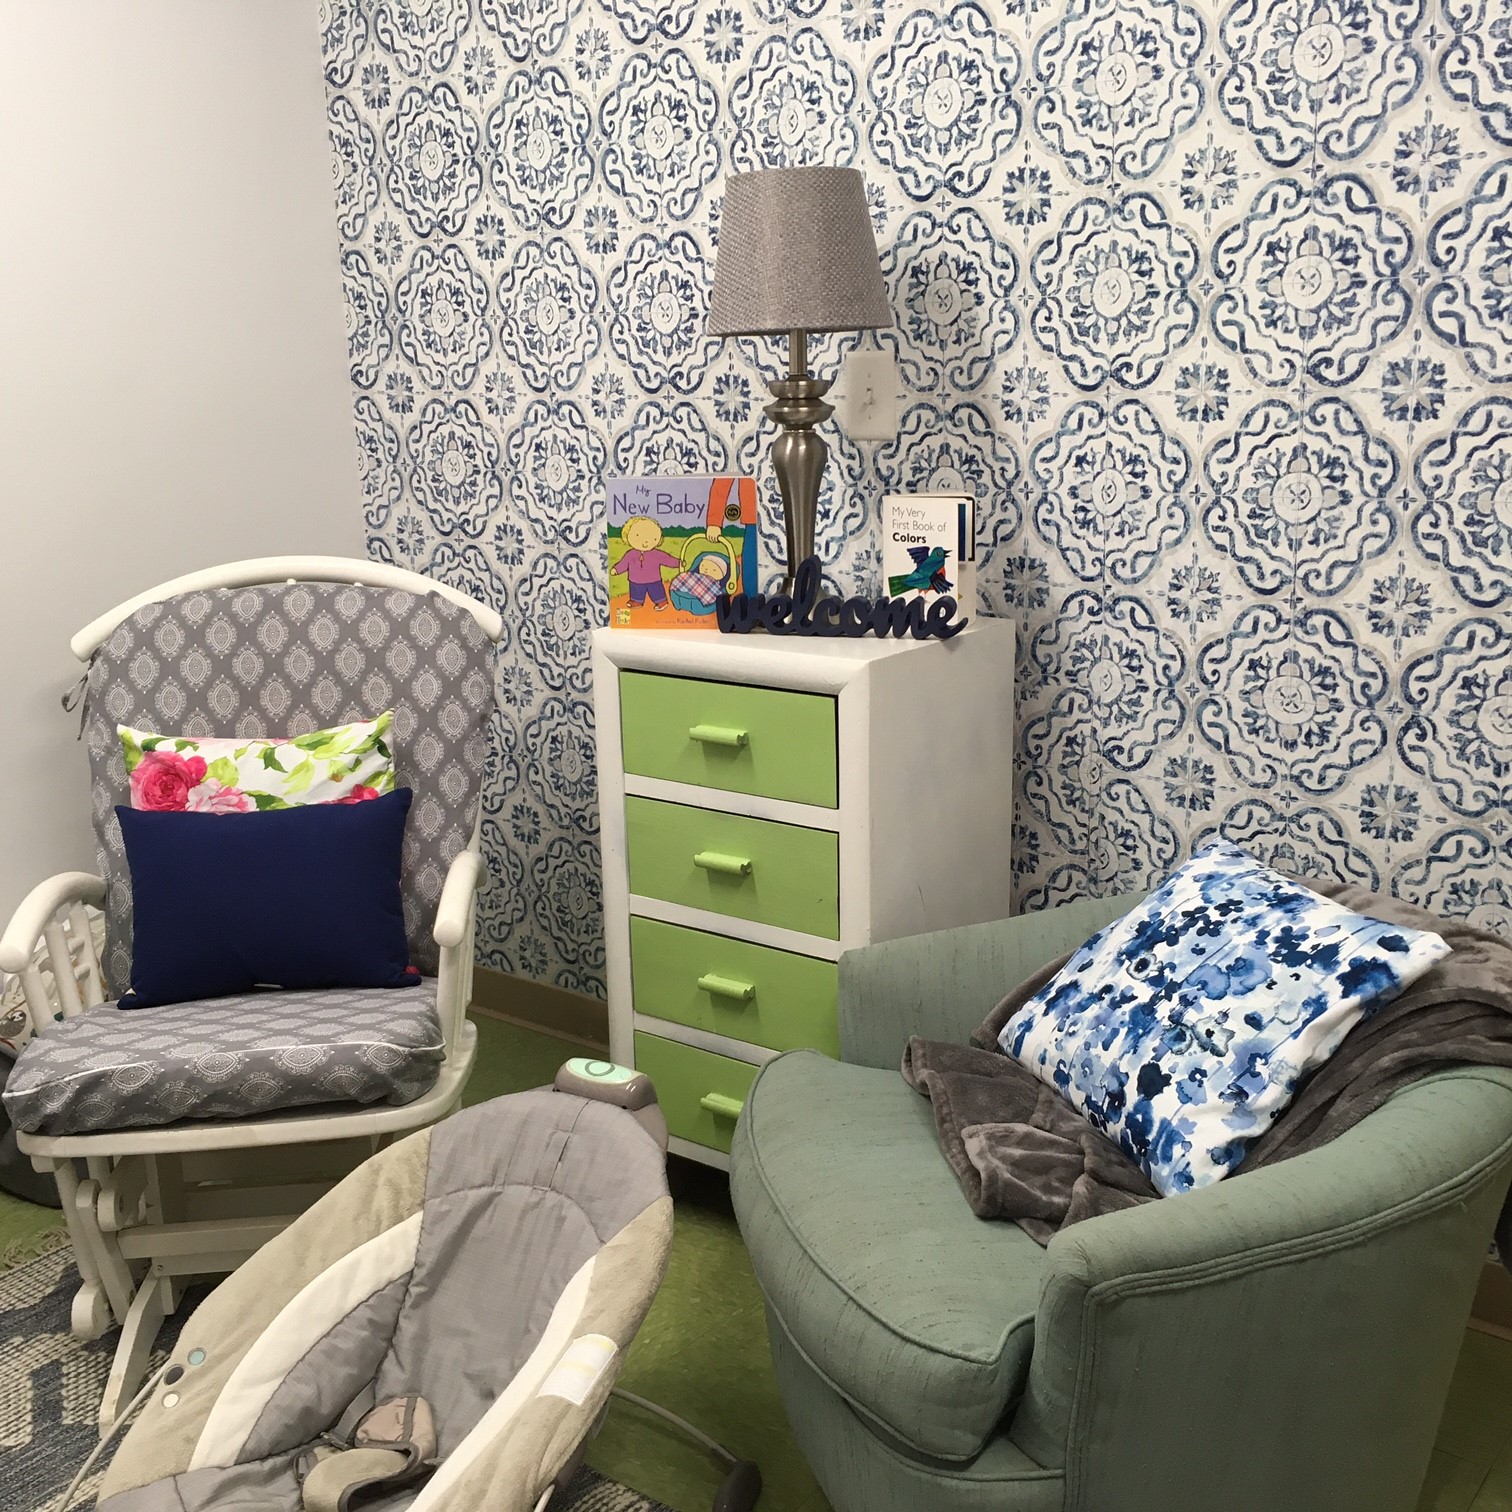 Image of a lactation space with a cushioned chair, a rocking chair, and a lamp on a small dresser.